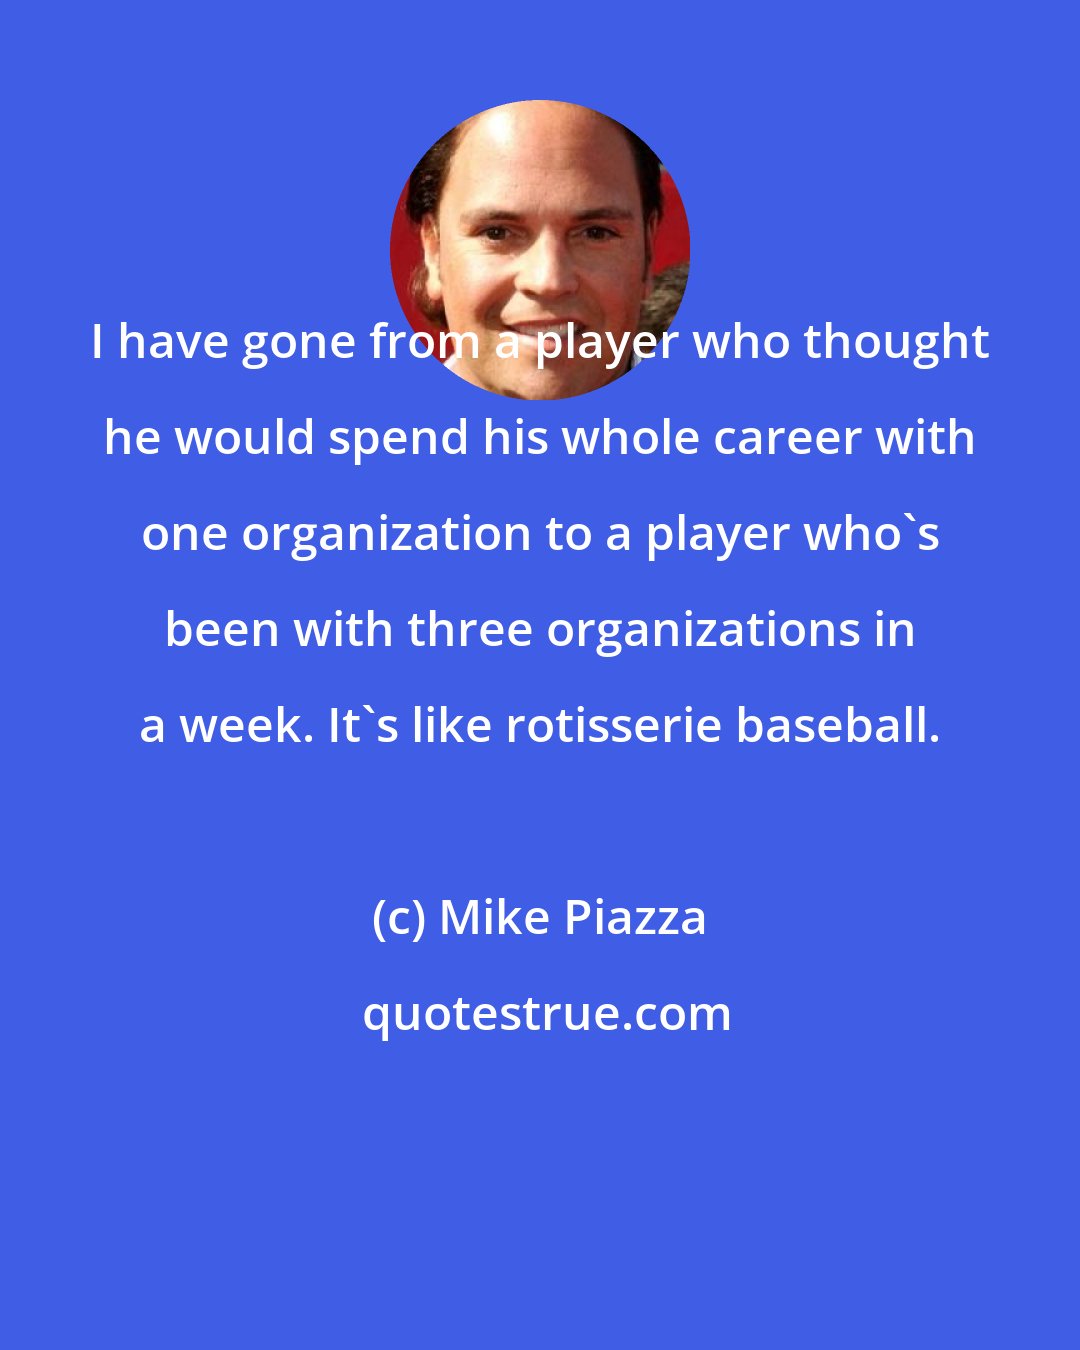 Mike Piazza: I have gone from a player who thought he would spend his whole career with one organization to a player who's been with three organizations in a week. It's like rotisserie baseball.